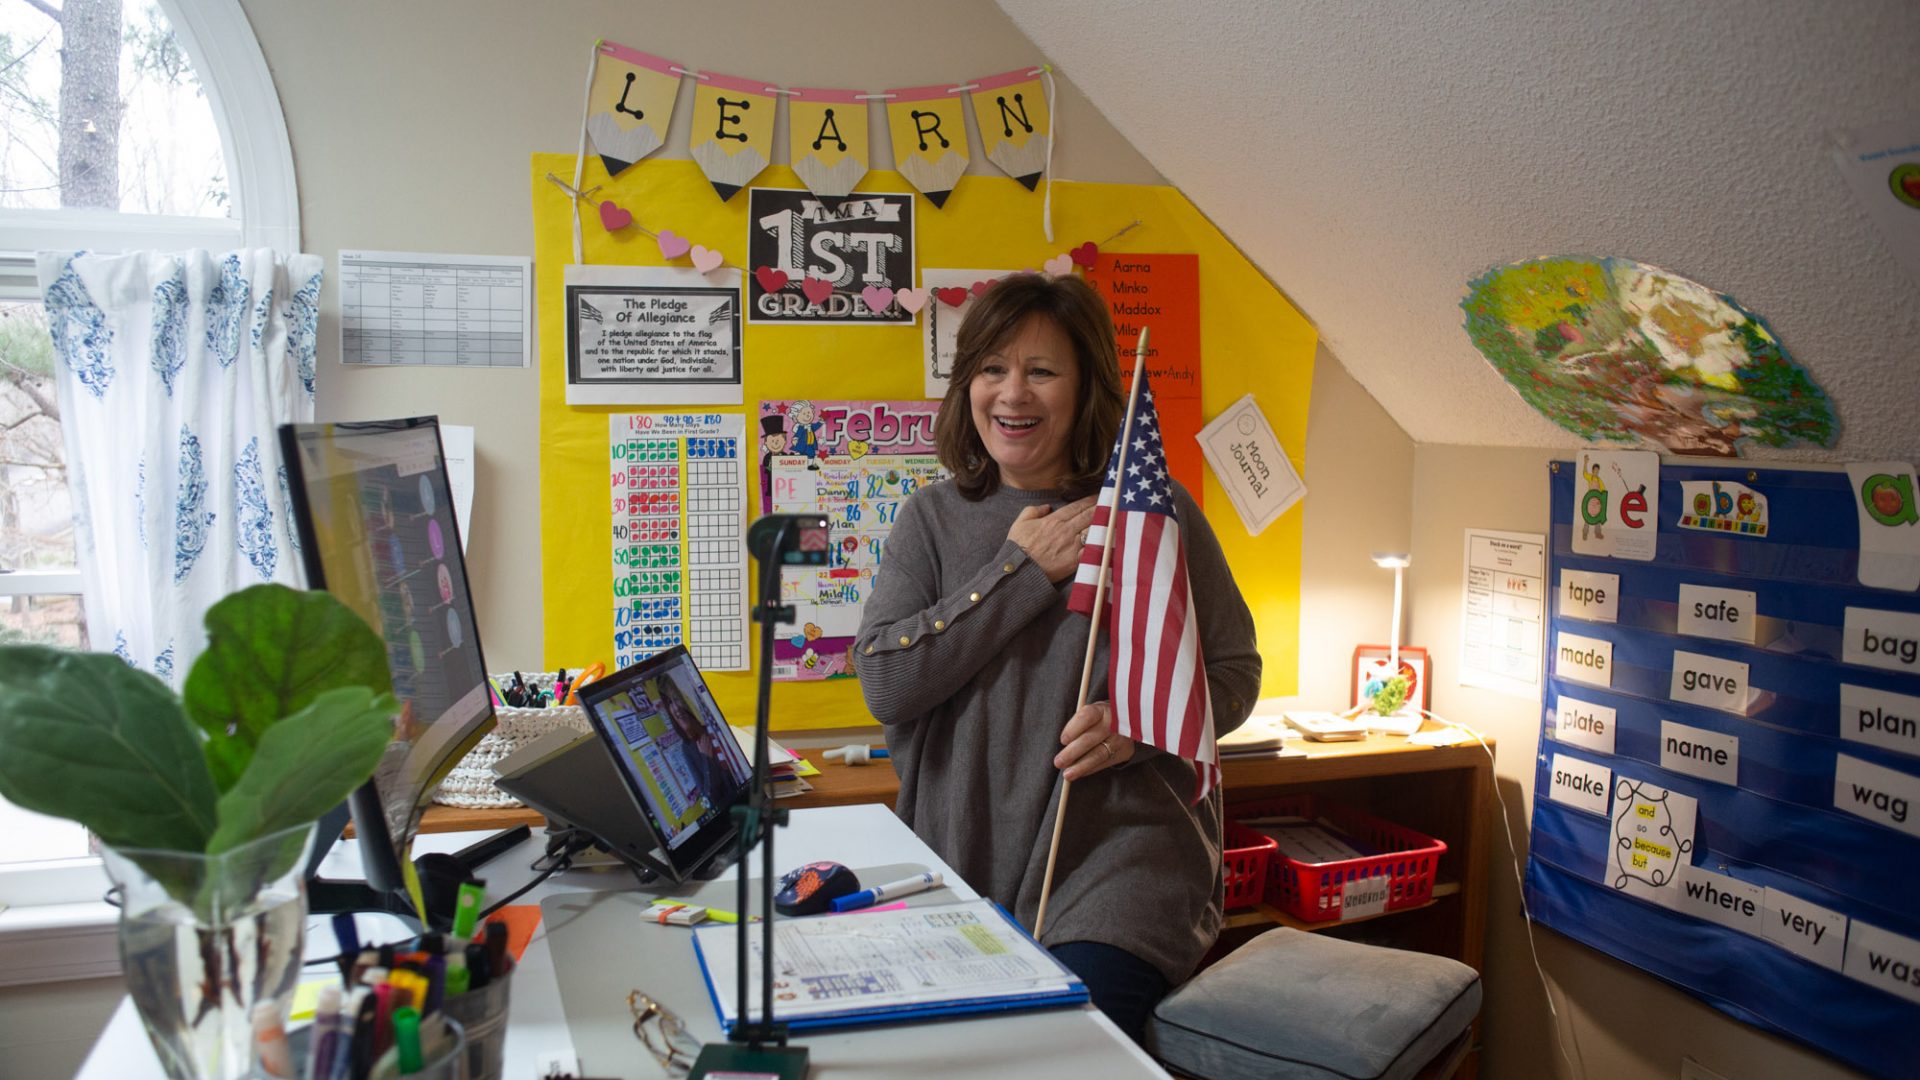 Woman holds an American flag as she puts her hand over her heart and conducts "The Pledge of Allegiance" over web-cam.